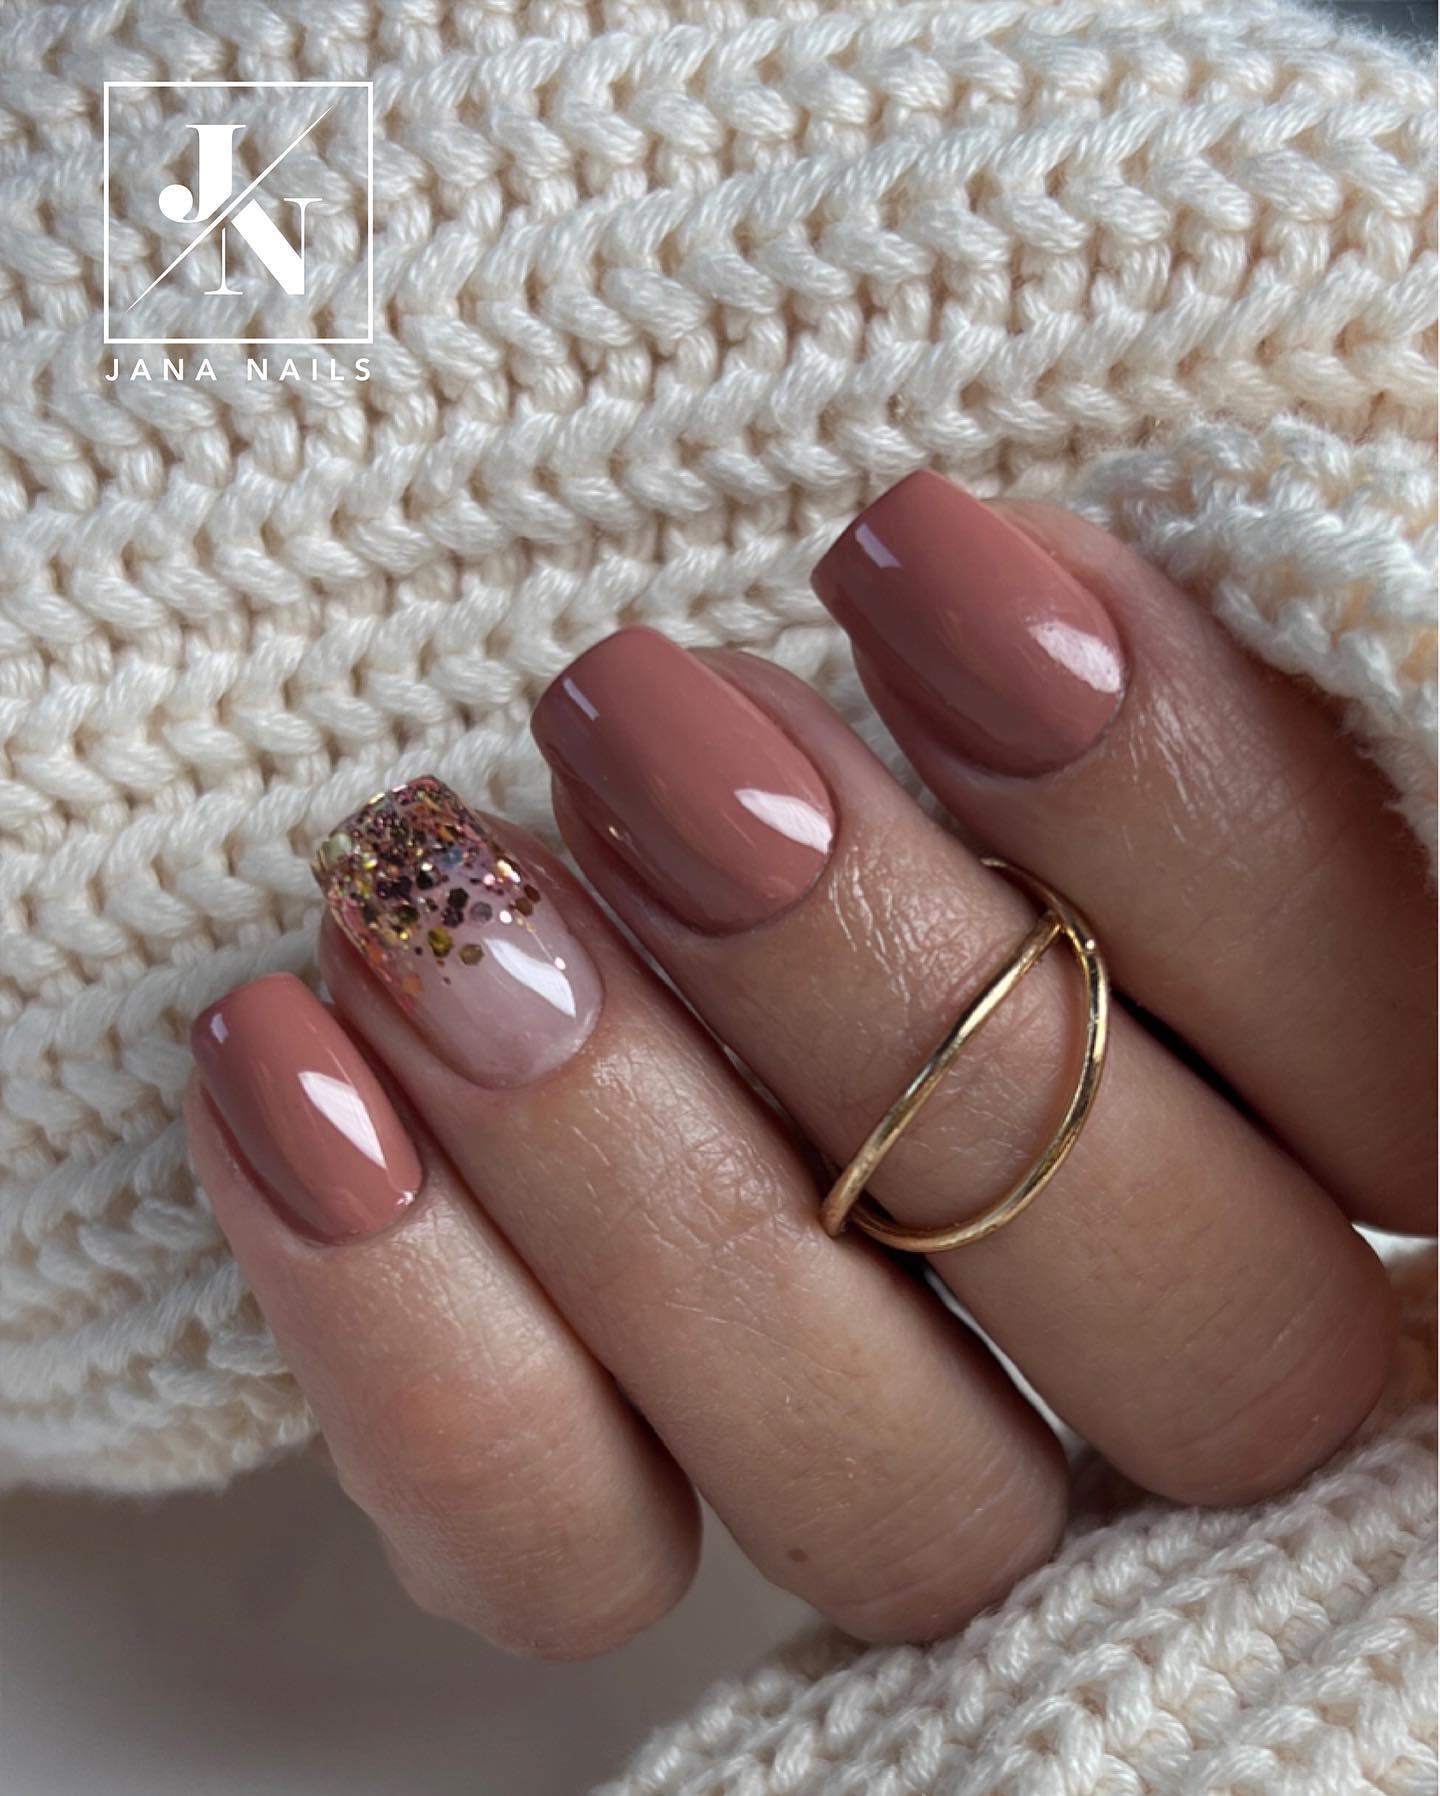 With brown nude nails, you won't look boring or too subtle. Brown is a color that can go with almost anything, and it's an excellent choice for fall and winter because it can look chic while still being warm enough for the colder months.